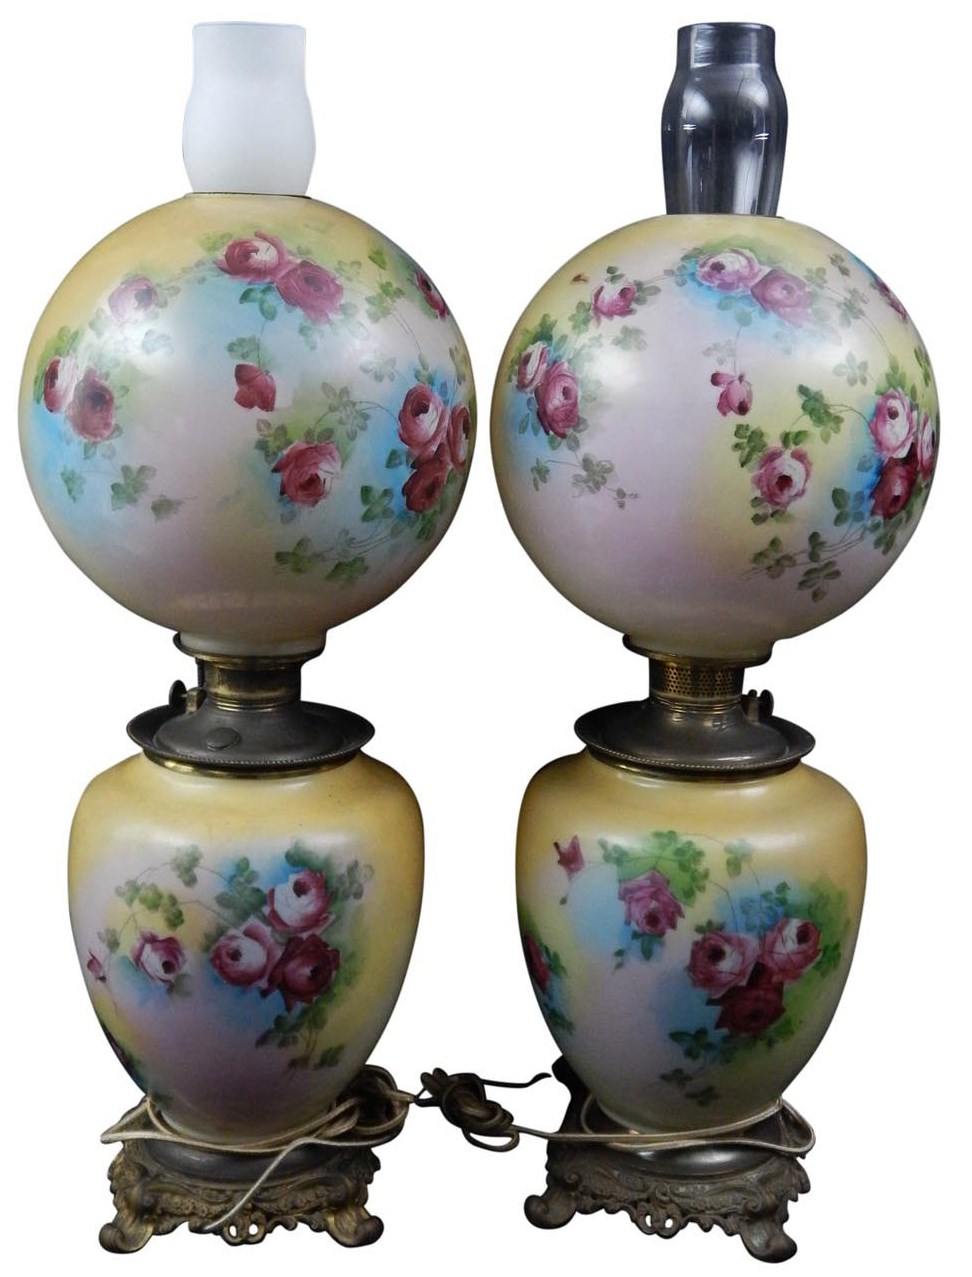 Rock And Pop Culture - Pair of Turn of the Century Gone with the Wind Lamps